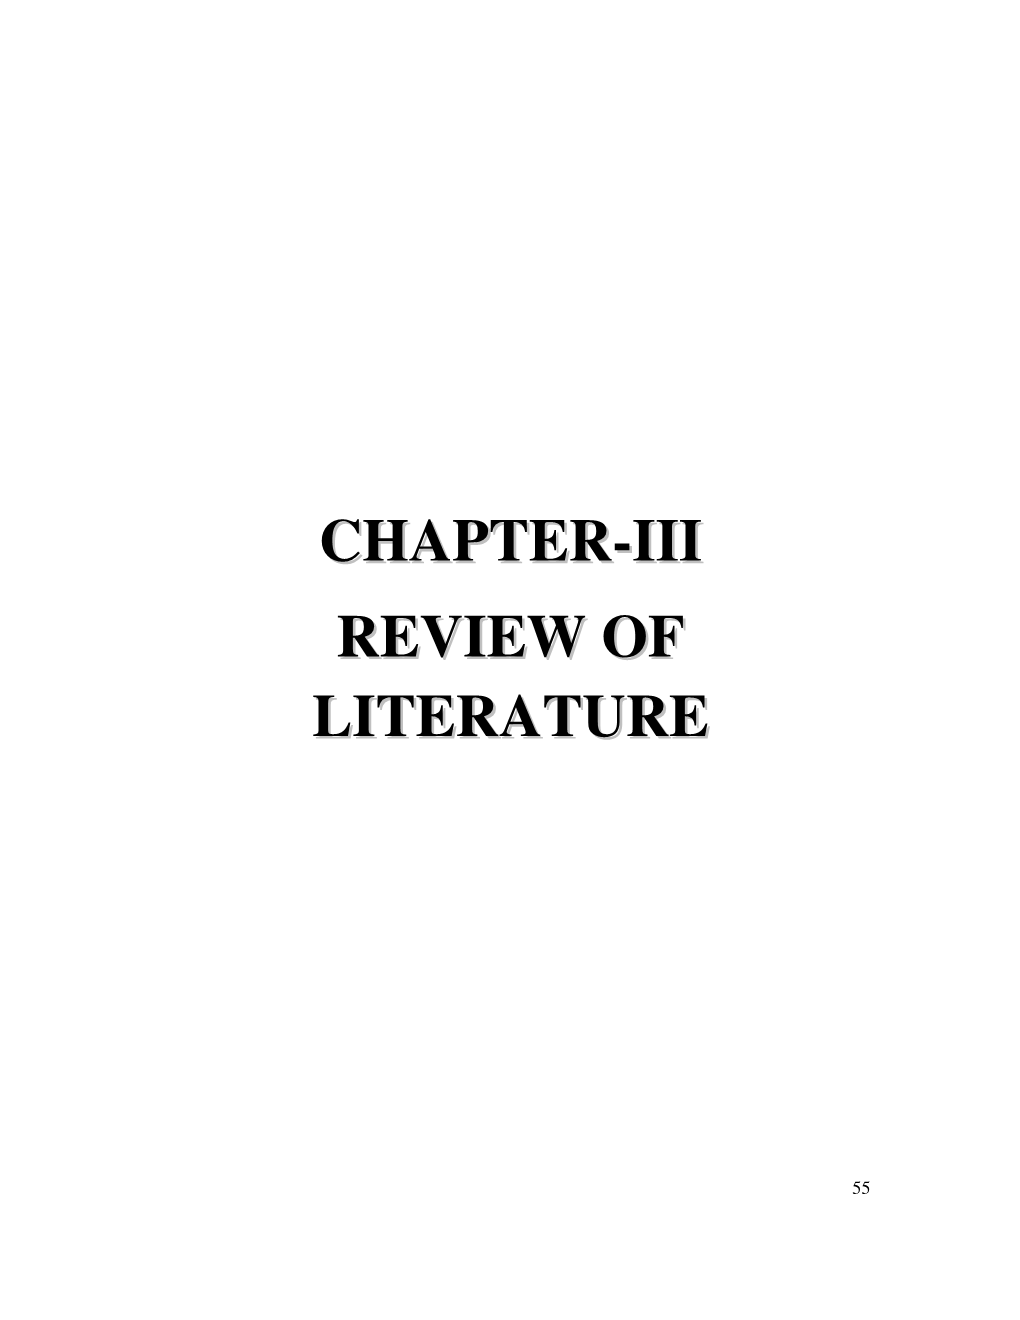 Chapter-Iii Review of Literature